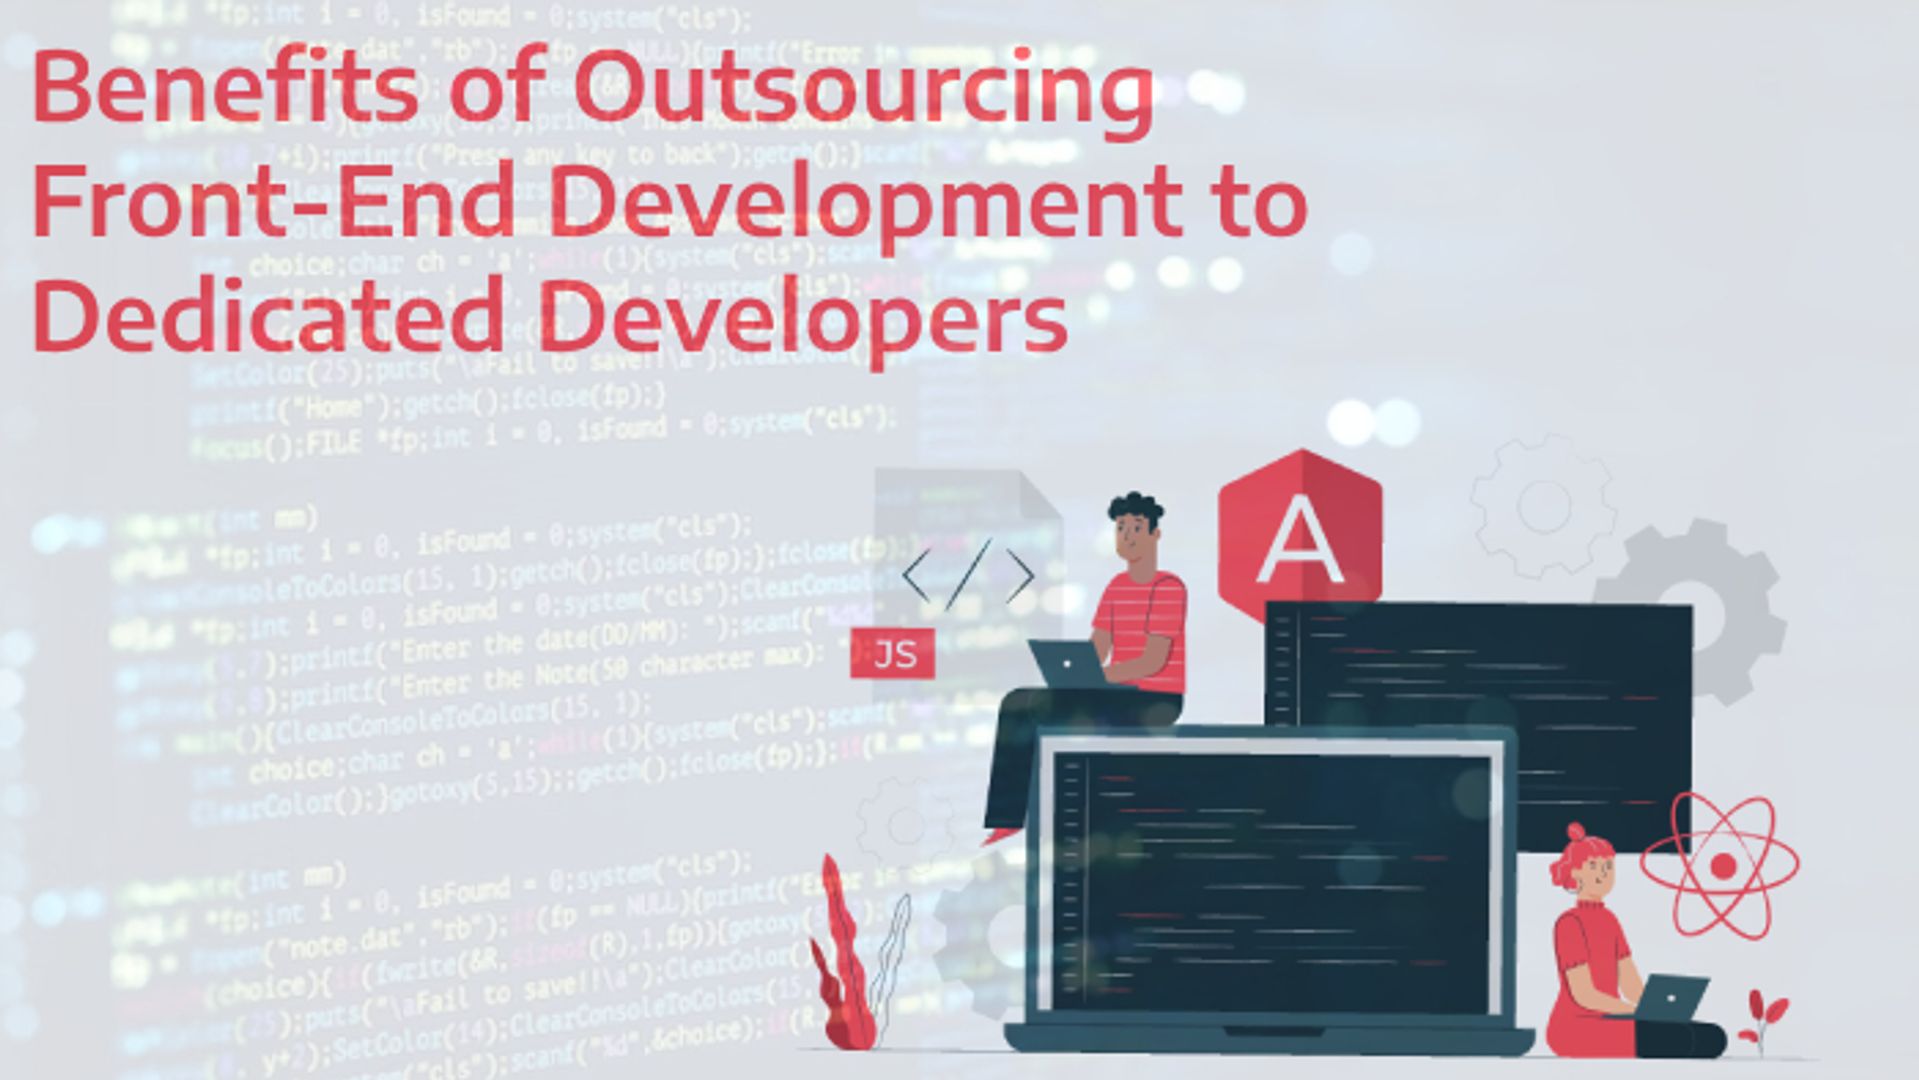 Benefits of Outsourcing Front-End Development to Dedicated Developers